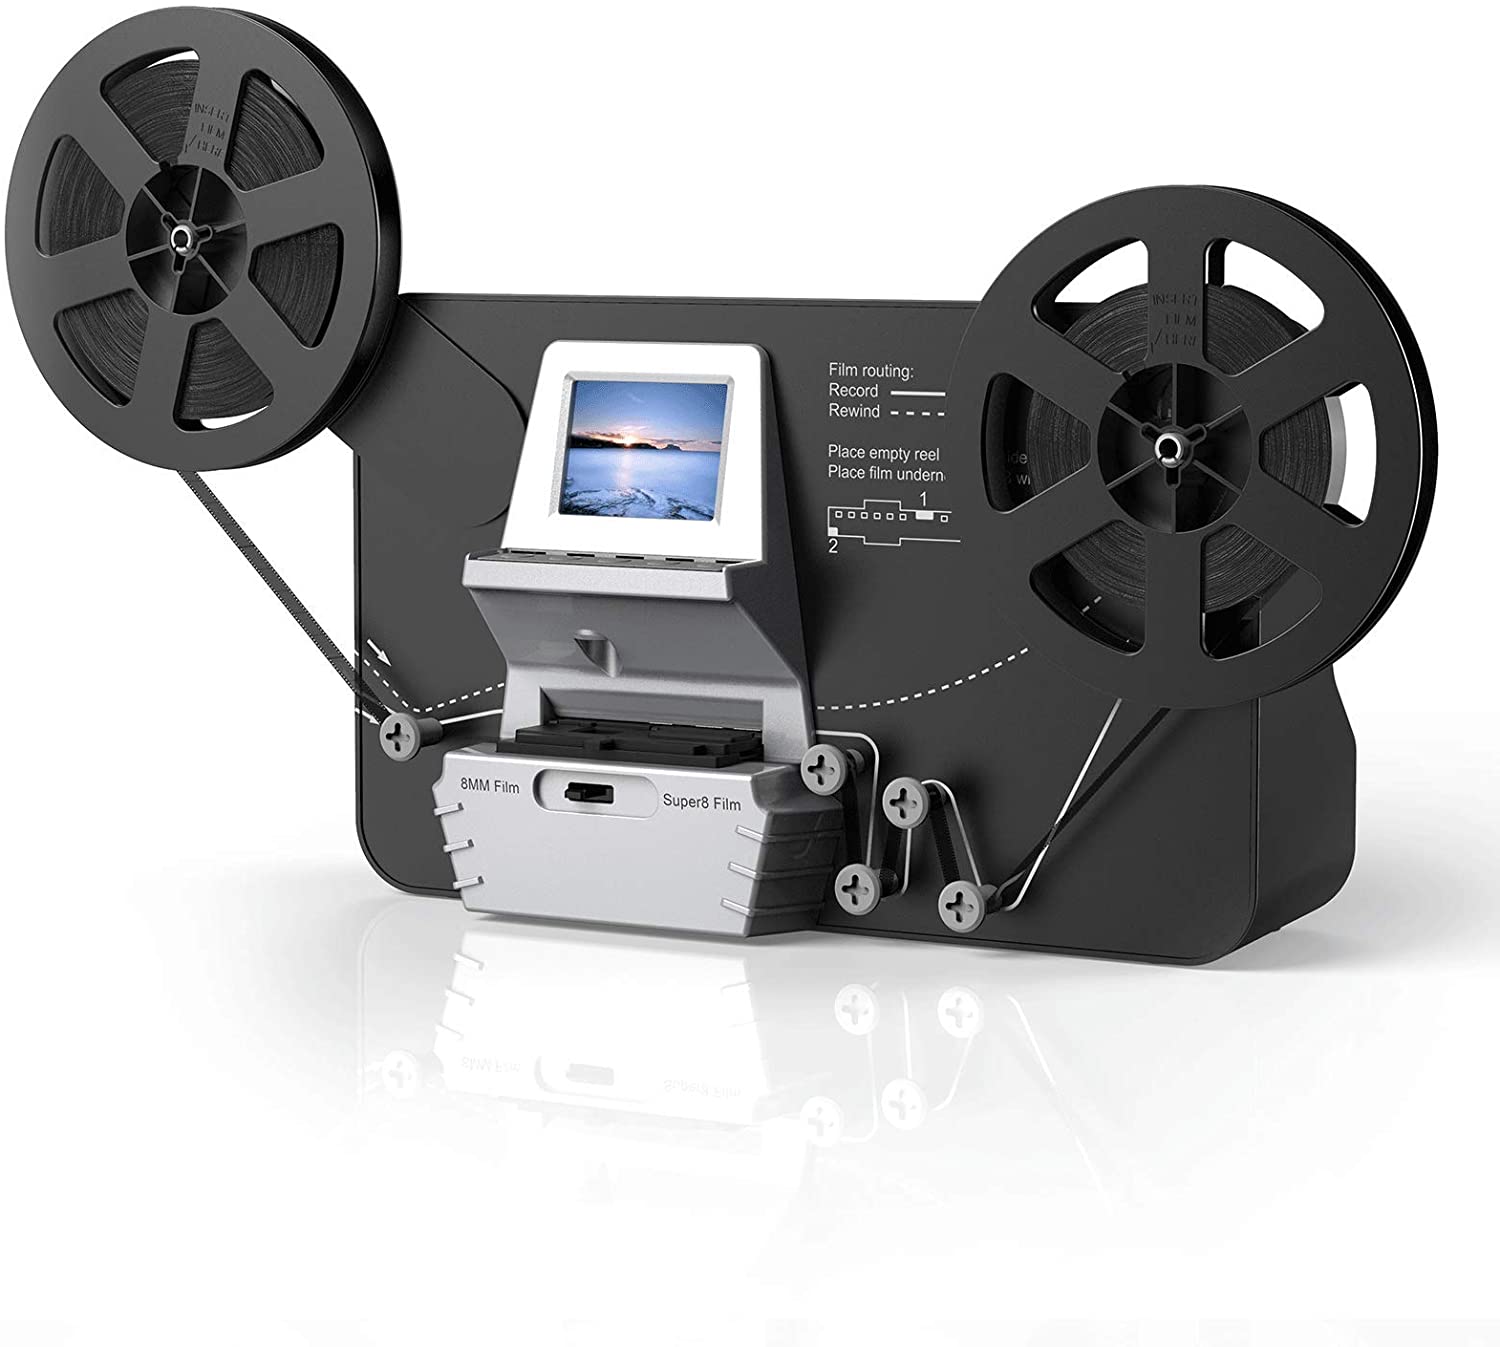 DIGITNOW 8mm & Super 8 Reels to Digital MovieMaker Film Sanner Converter, Pro Film Digitizer Machine with 2.4" LCD, Convert 3 inch and 5 inch 8mm Super 8 Film reels into 1080P Digital Videos,with 3